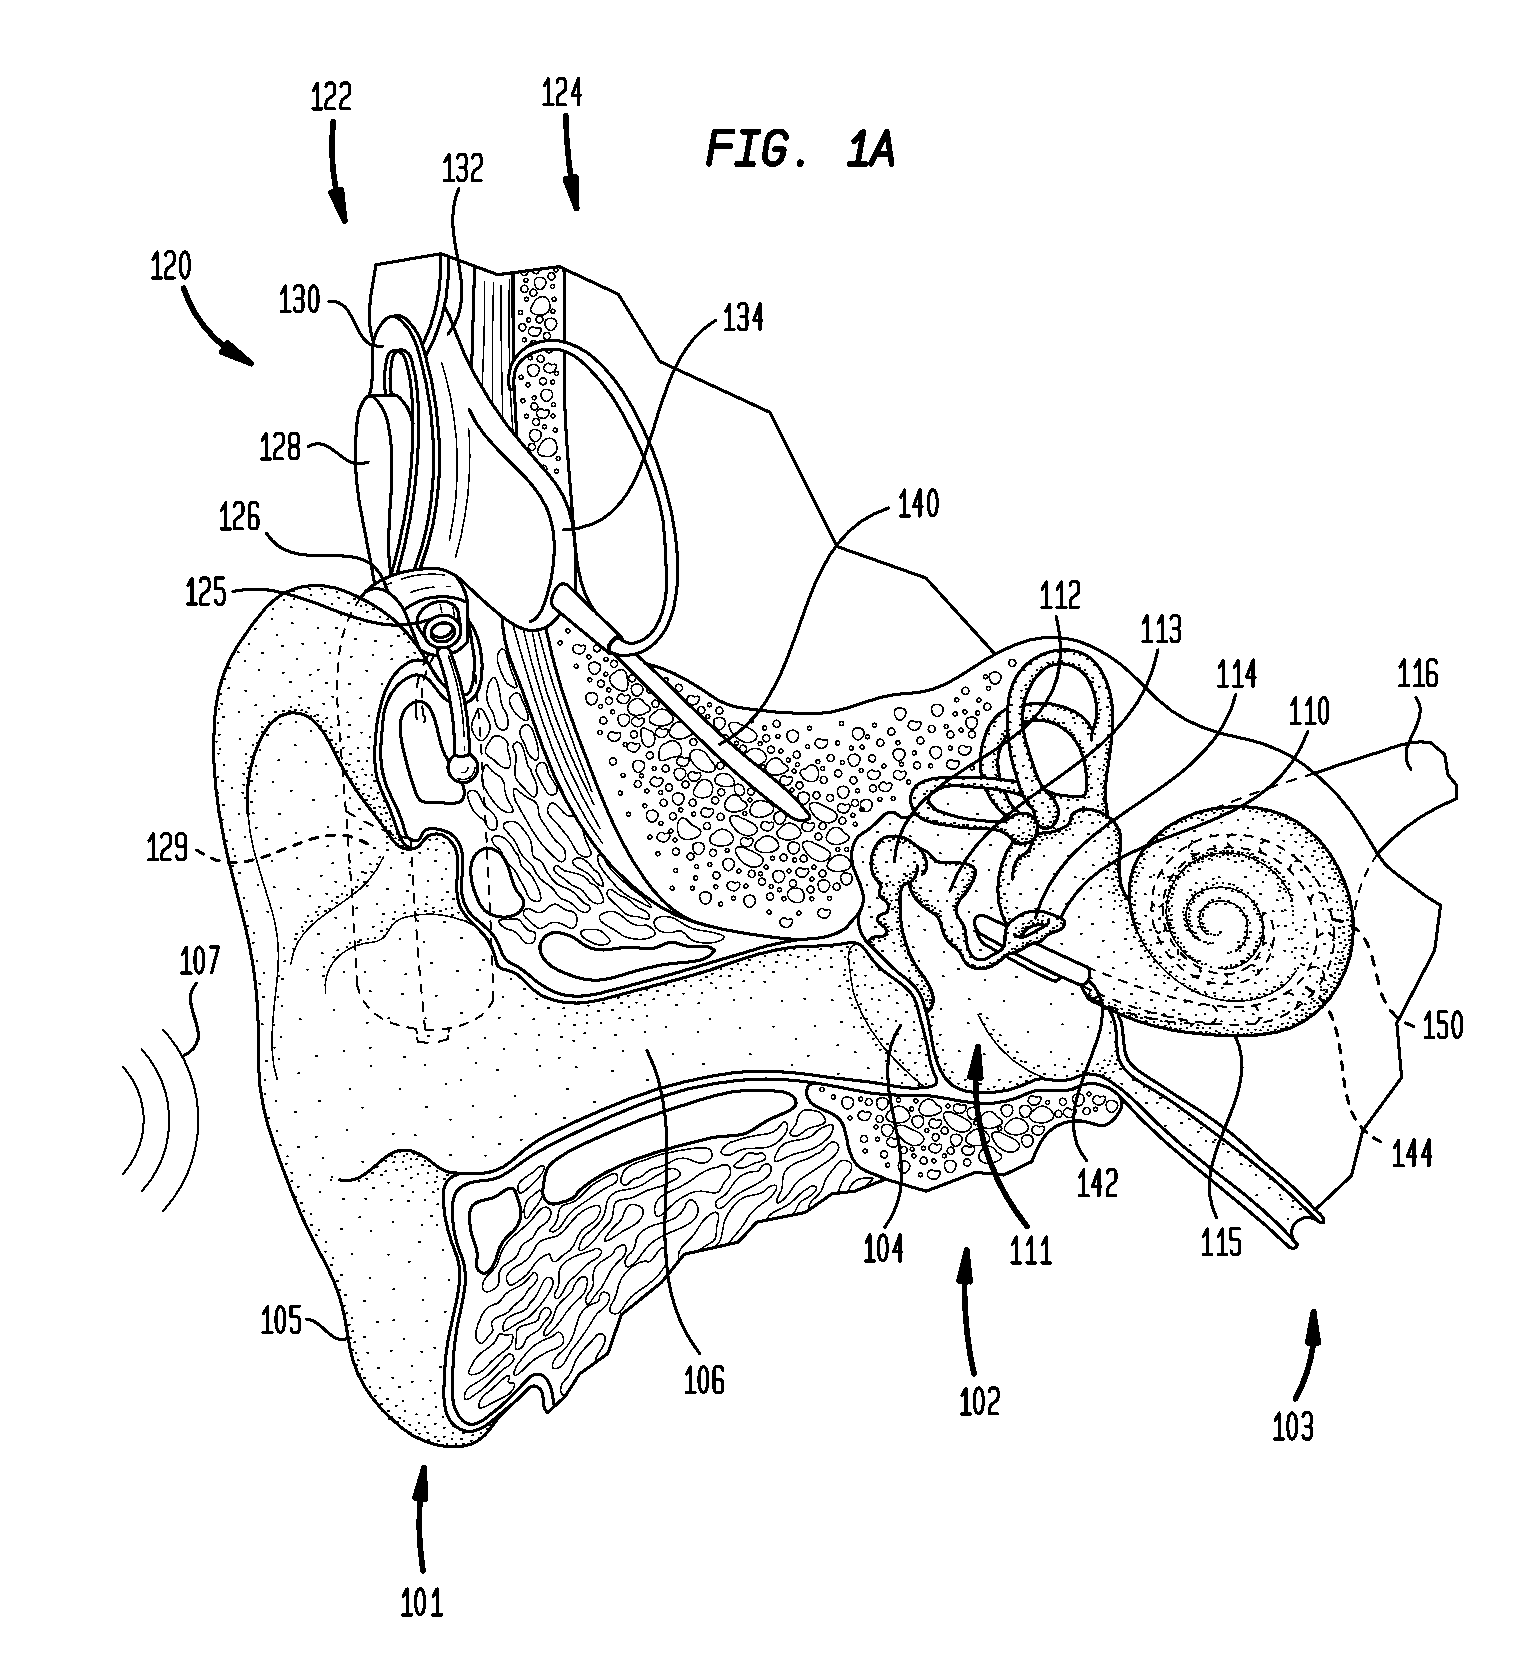 Complimentary drug delivery sheath for an implantable medical device